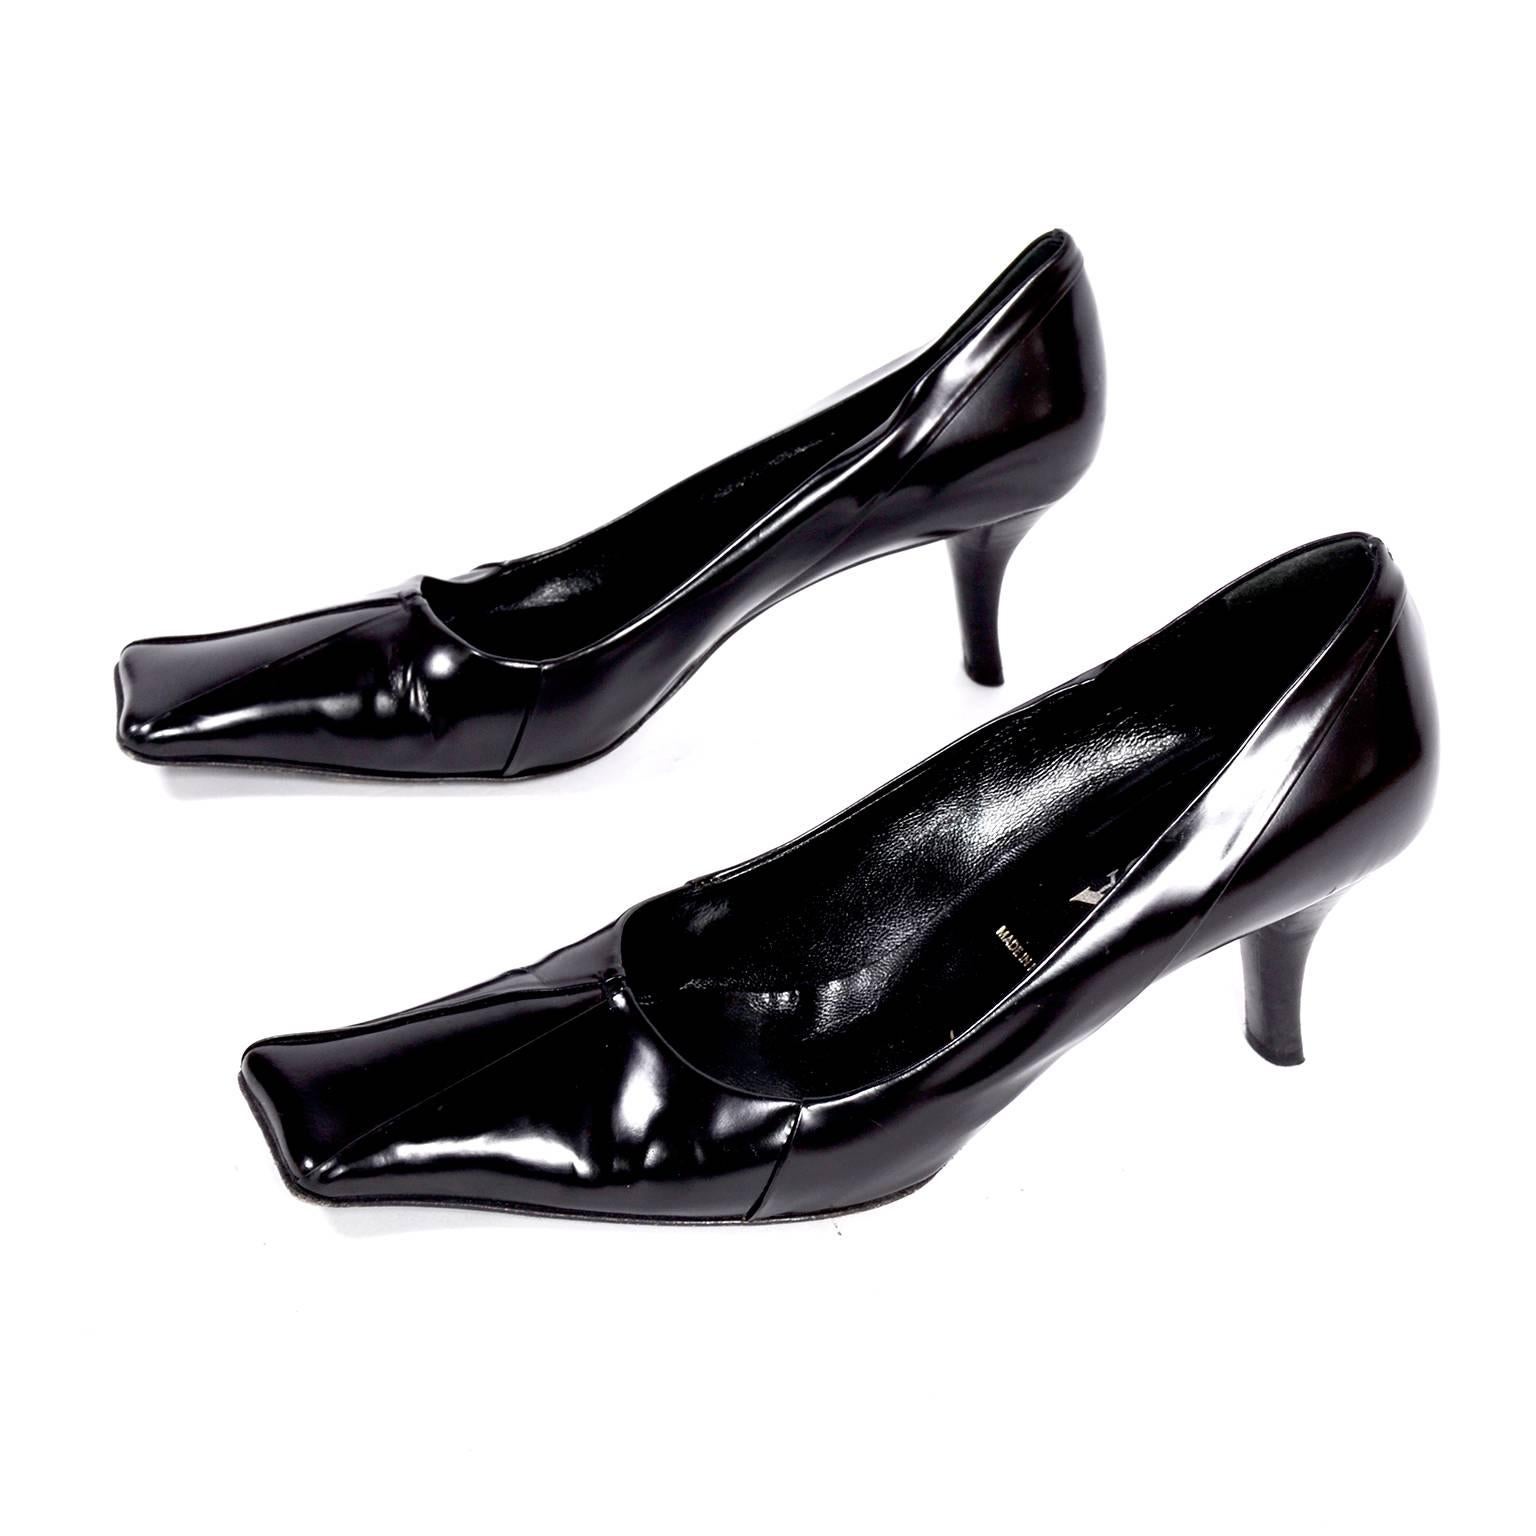 These iconic Prada black leather shoes have the signature square Prada toes, 